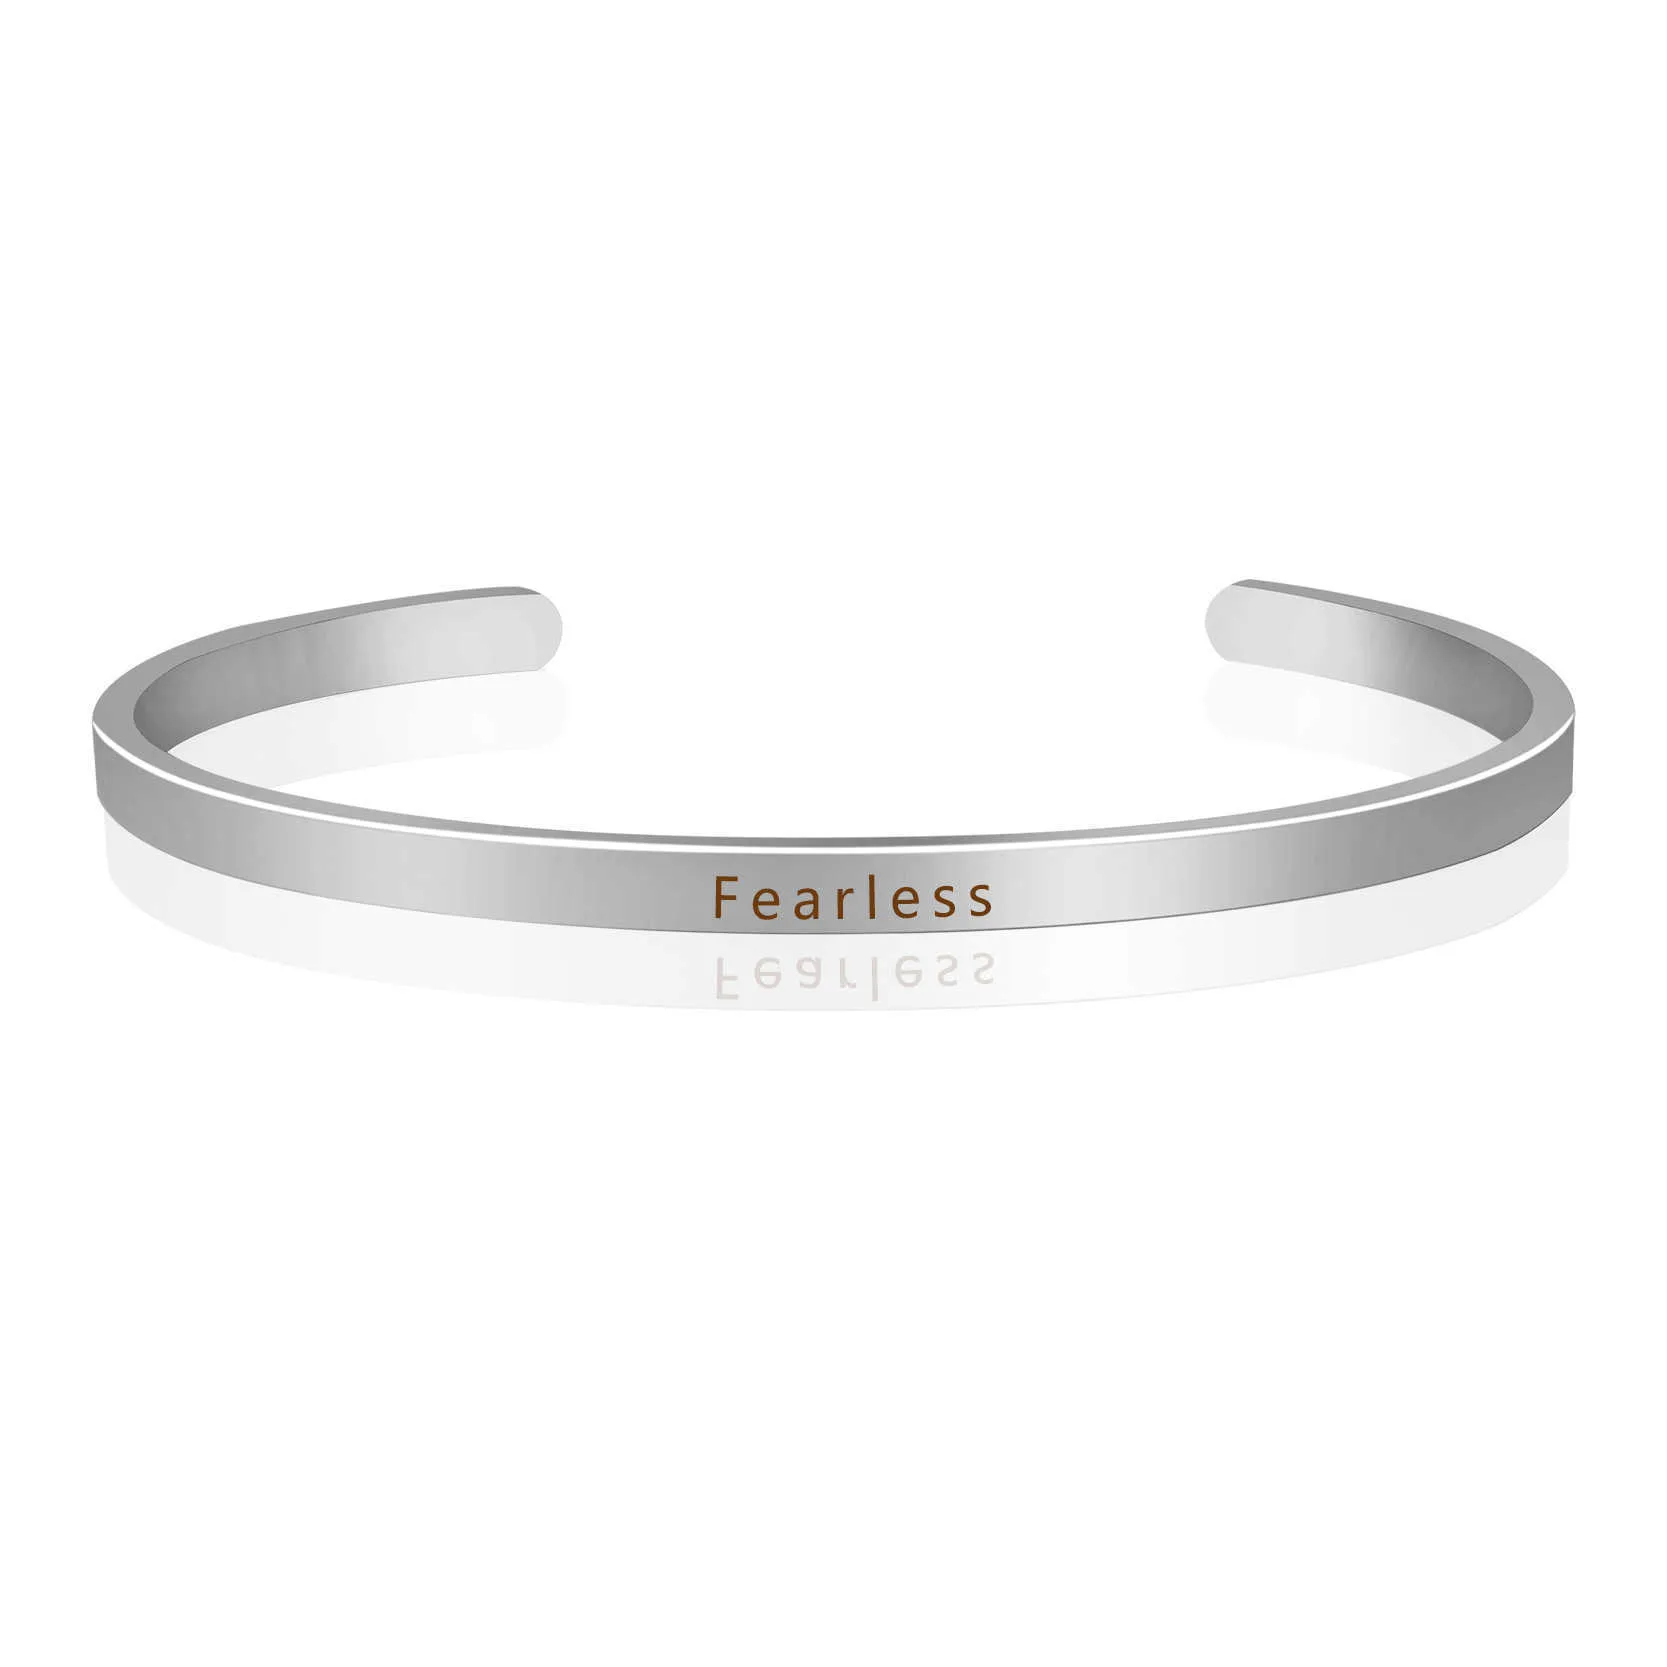 Fearless Engraved Positive Inspirational Quote Bangles Cuff Bracelet Charm Bangles for Women Gift Personality Jewelry Q0719